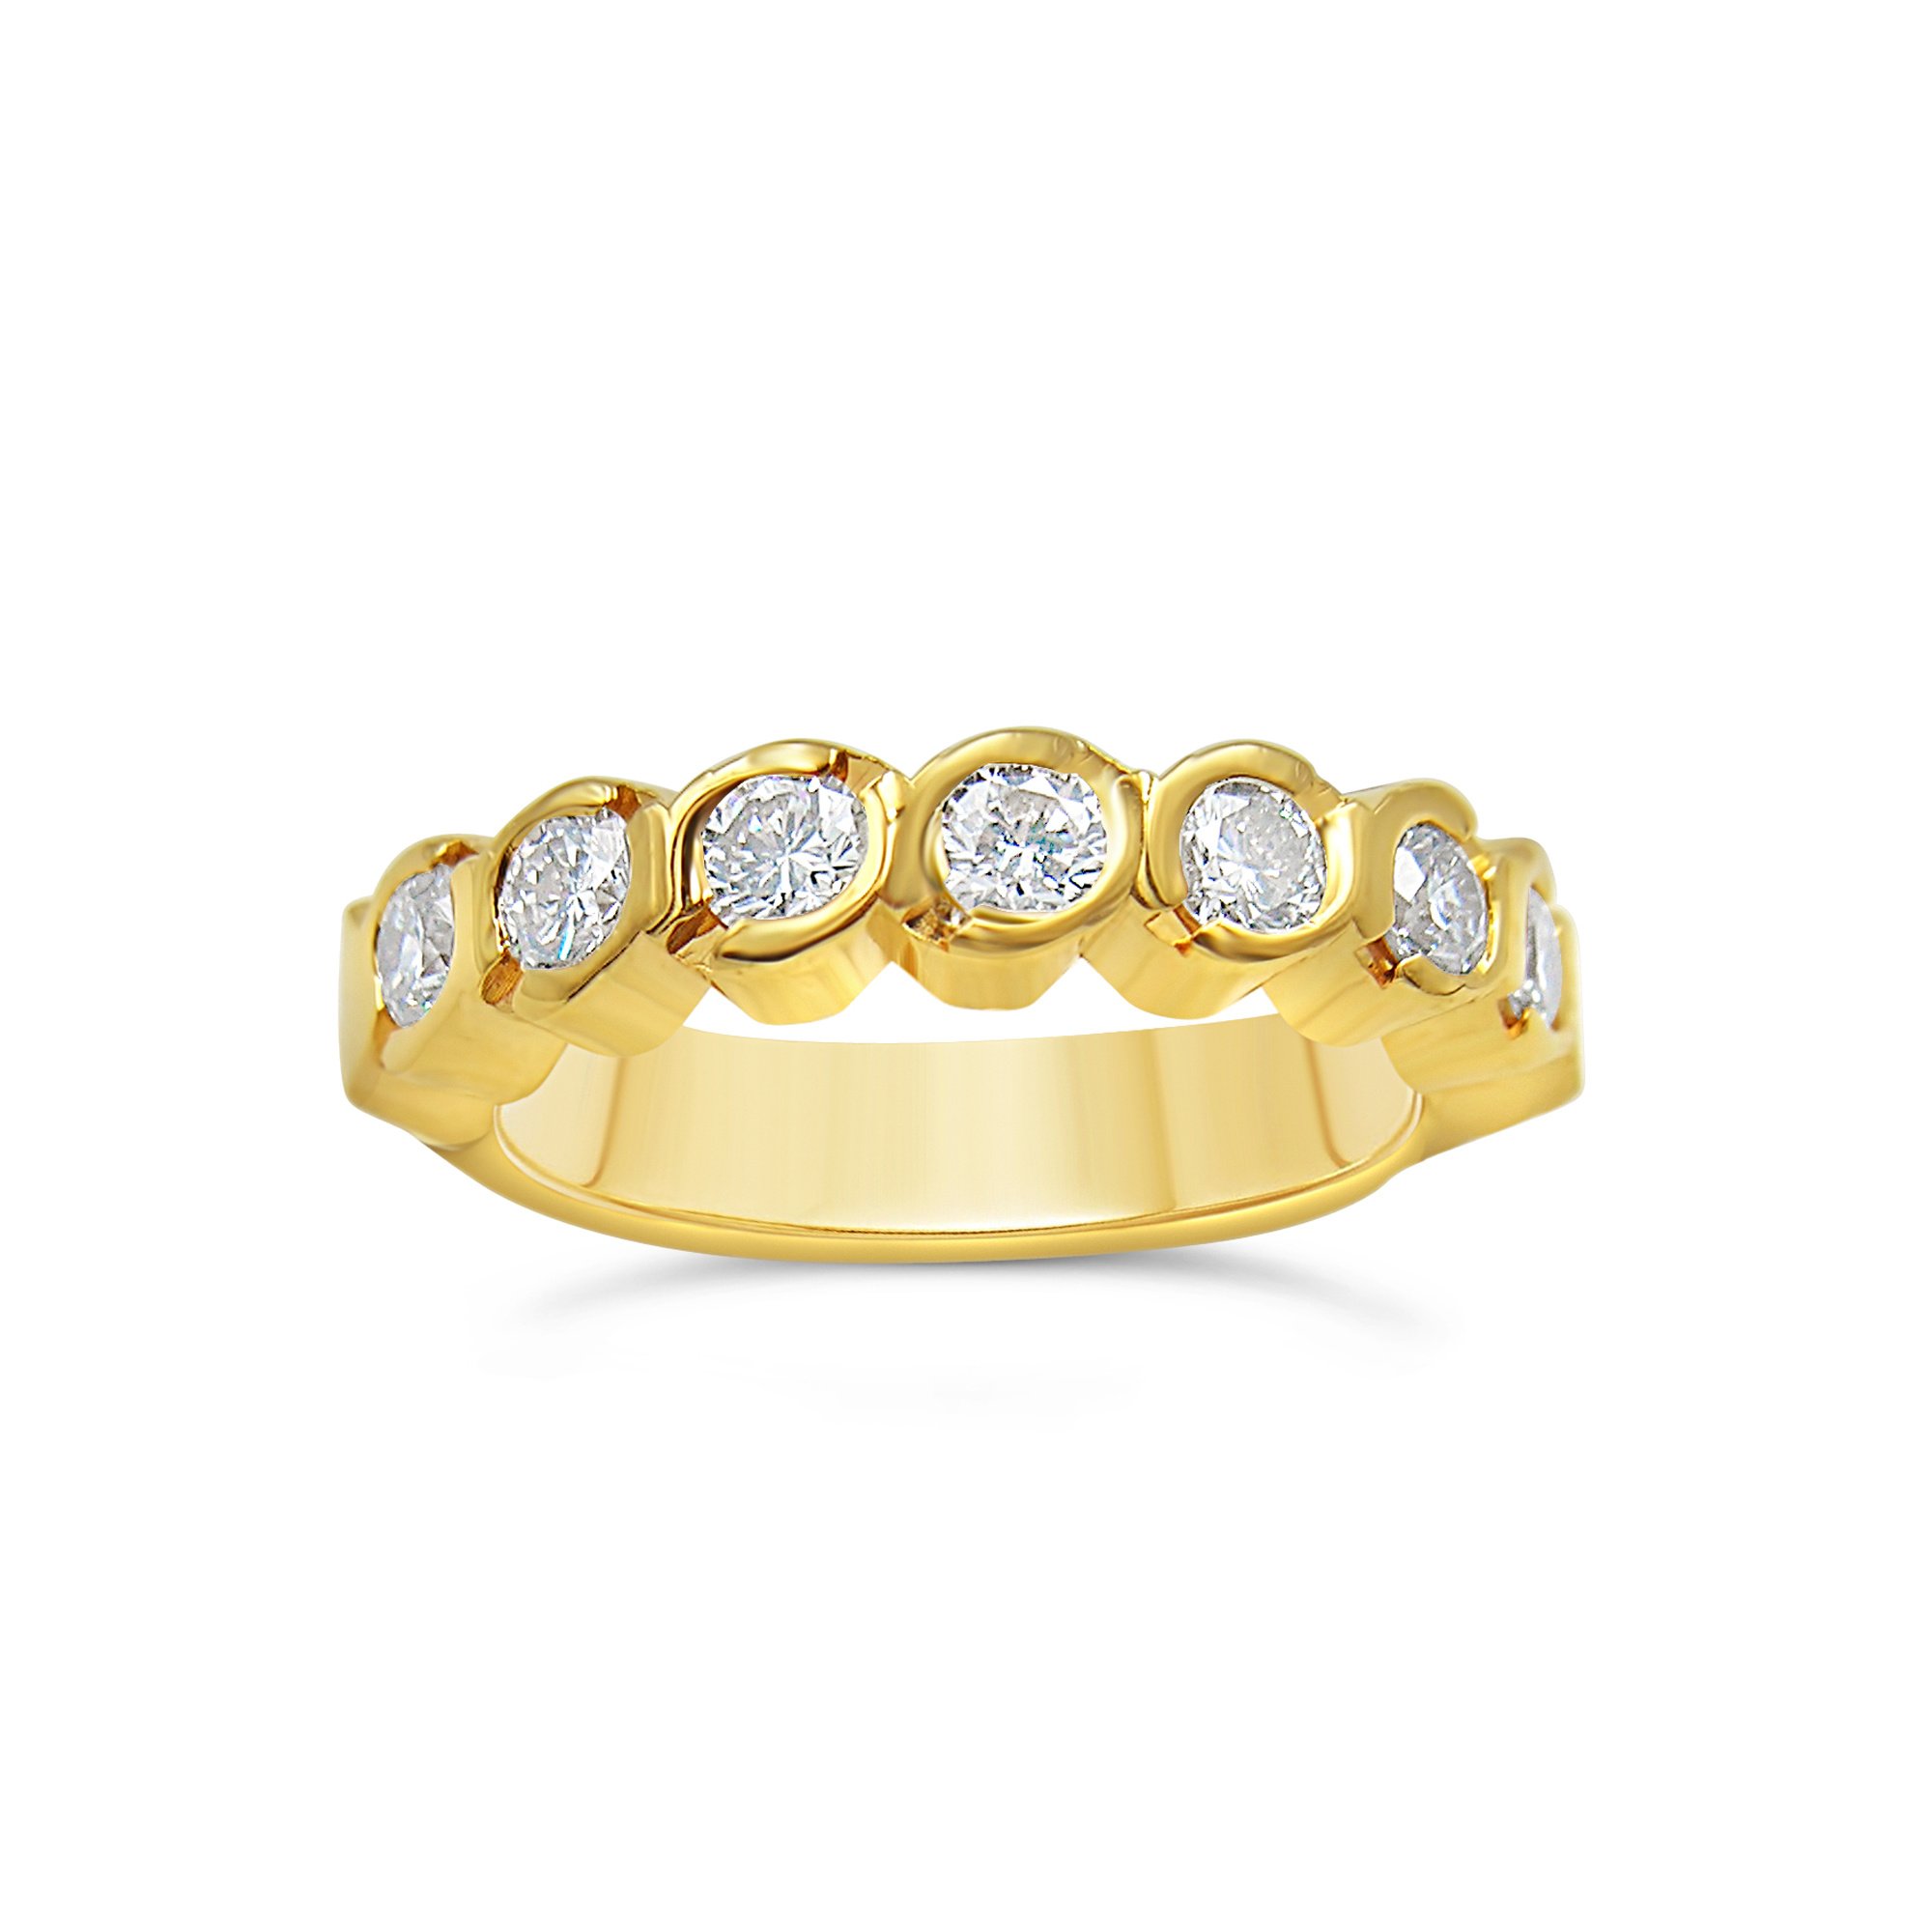 18k yellow gold ring with 0.63 ct diamonds